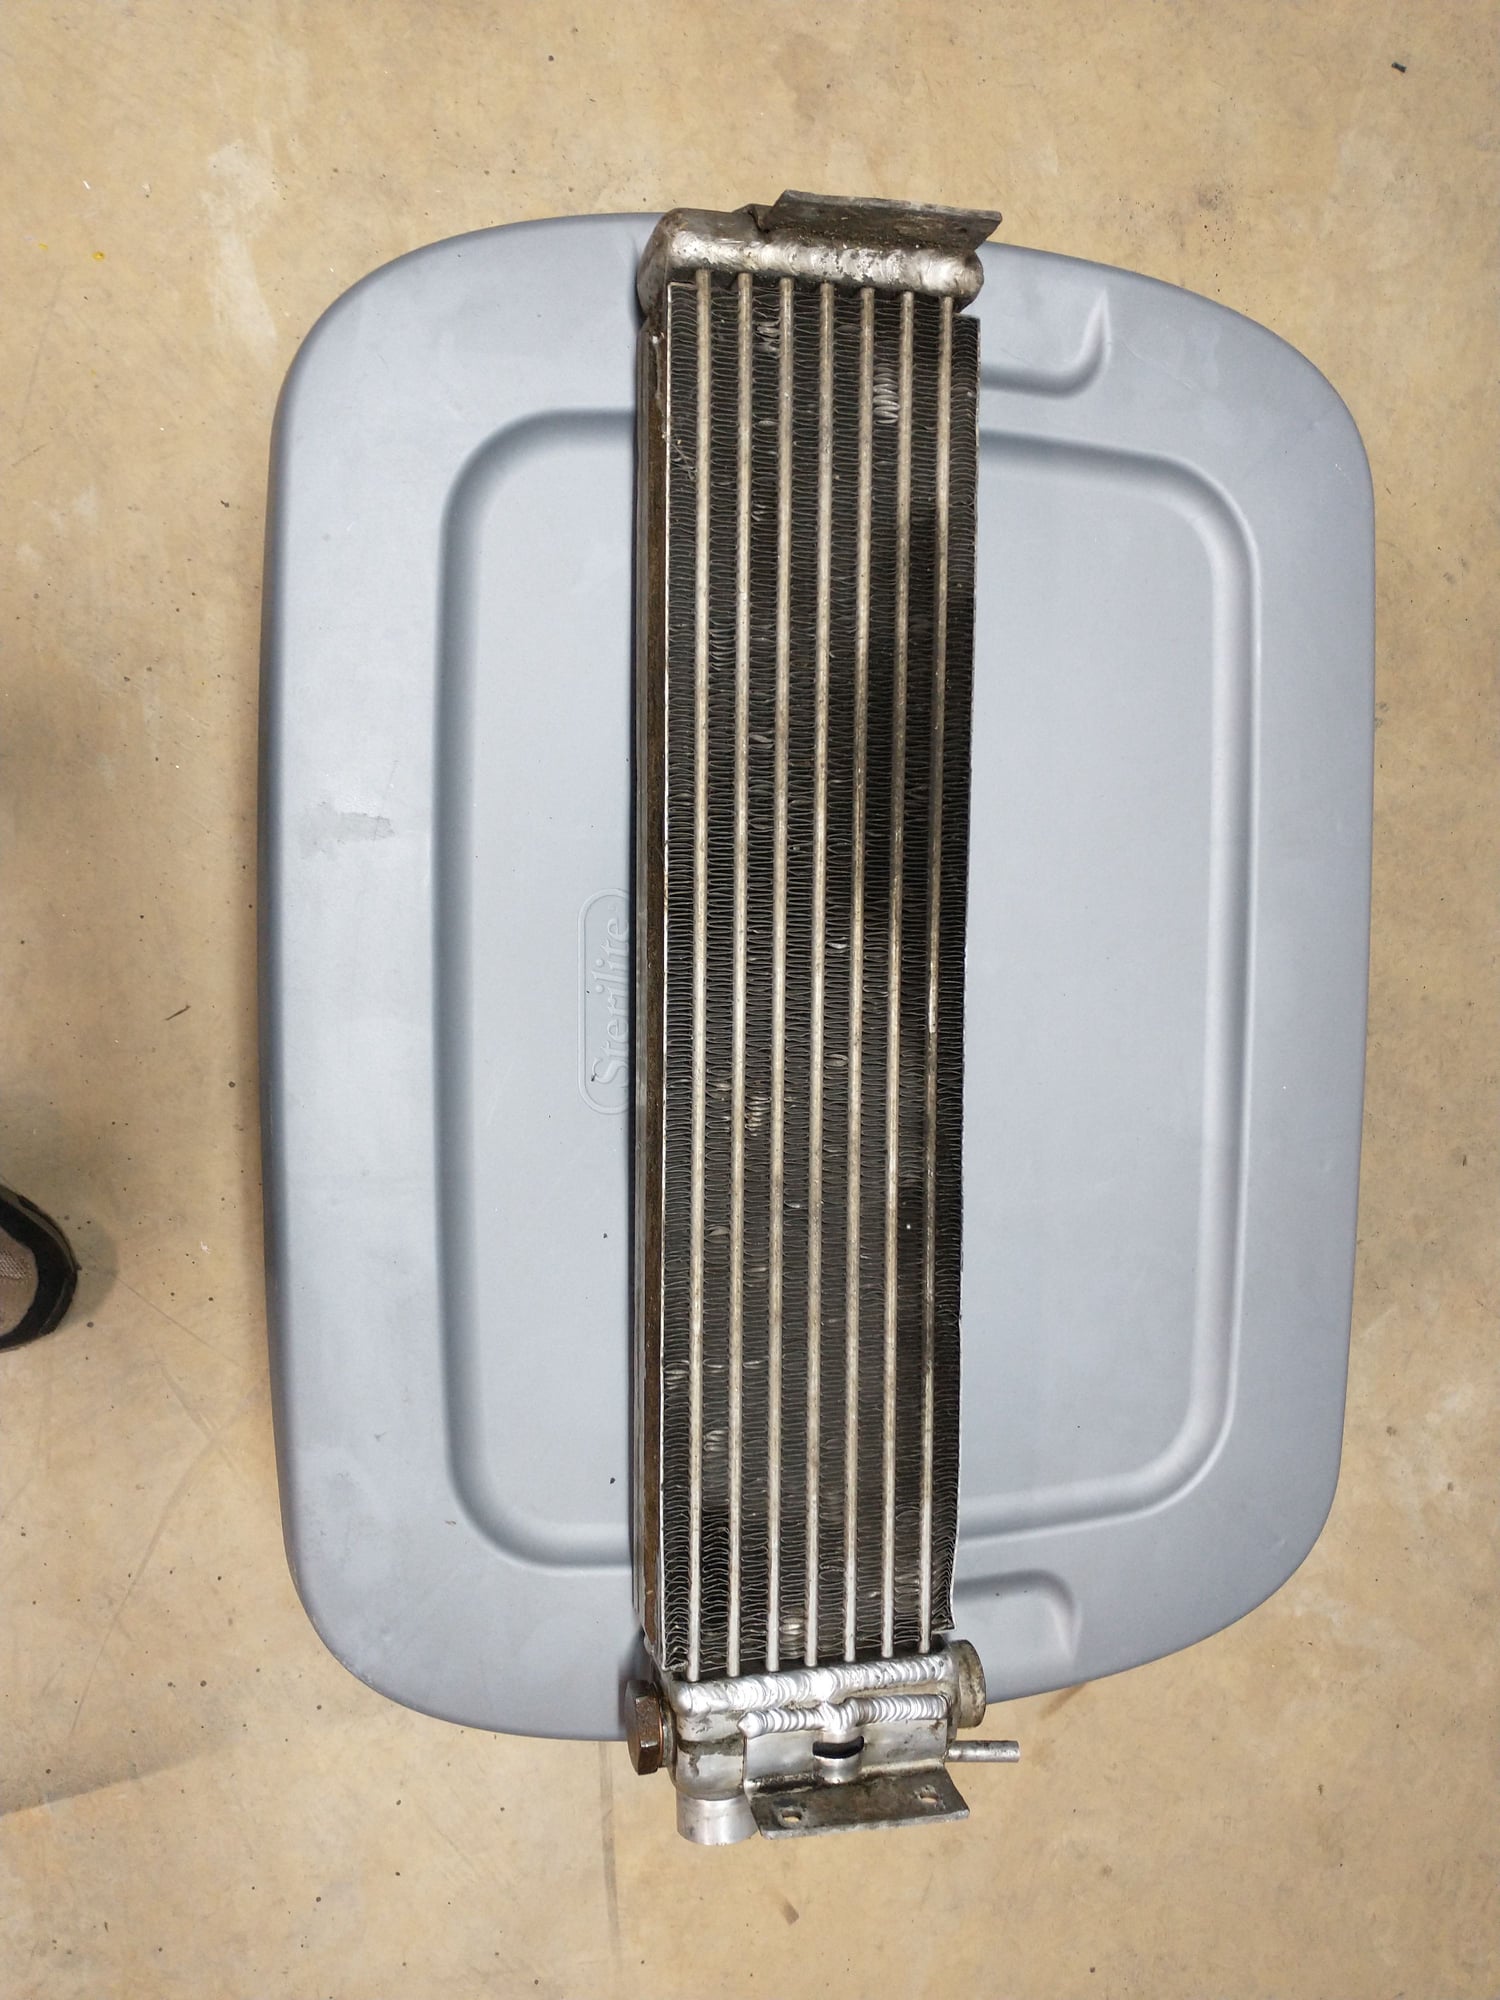 Miscellaneous - FC Oil Cooler - Used - 1986 to 1991 Mazda RX-7 - Elkton, MD 21921, United States